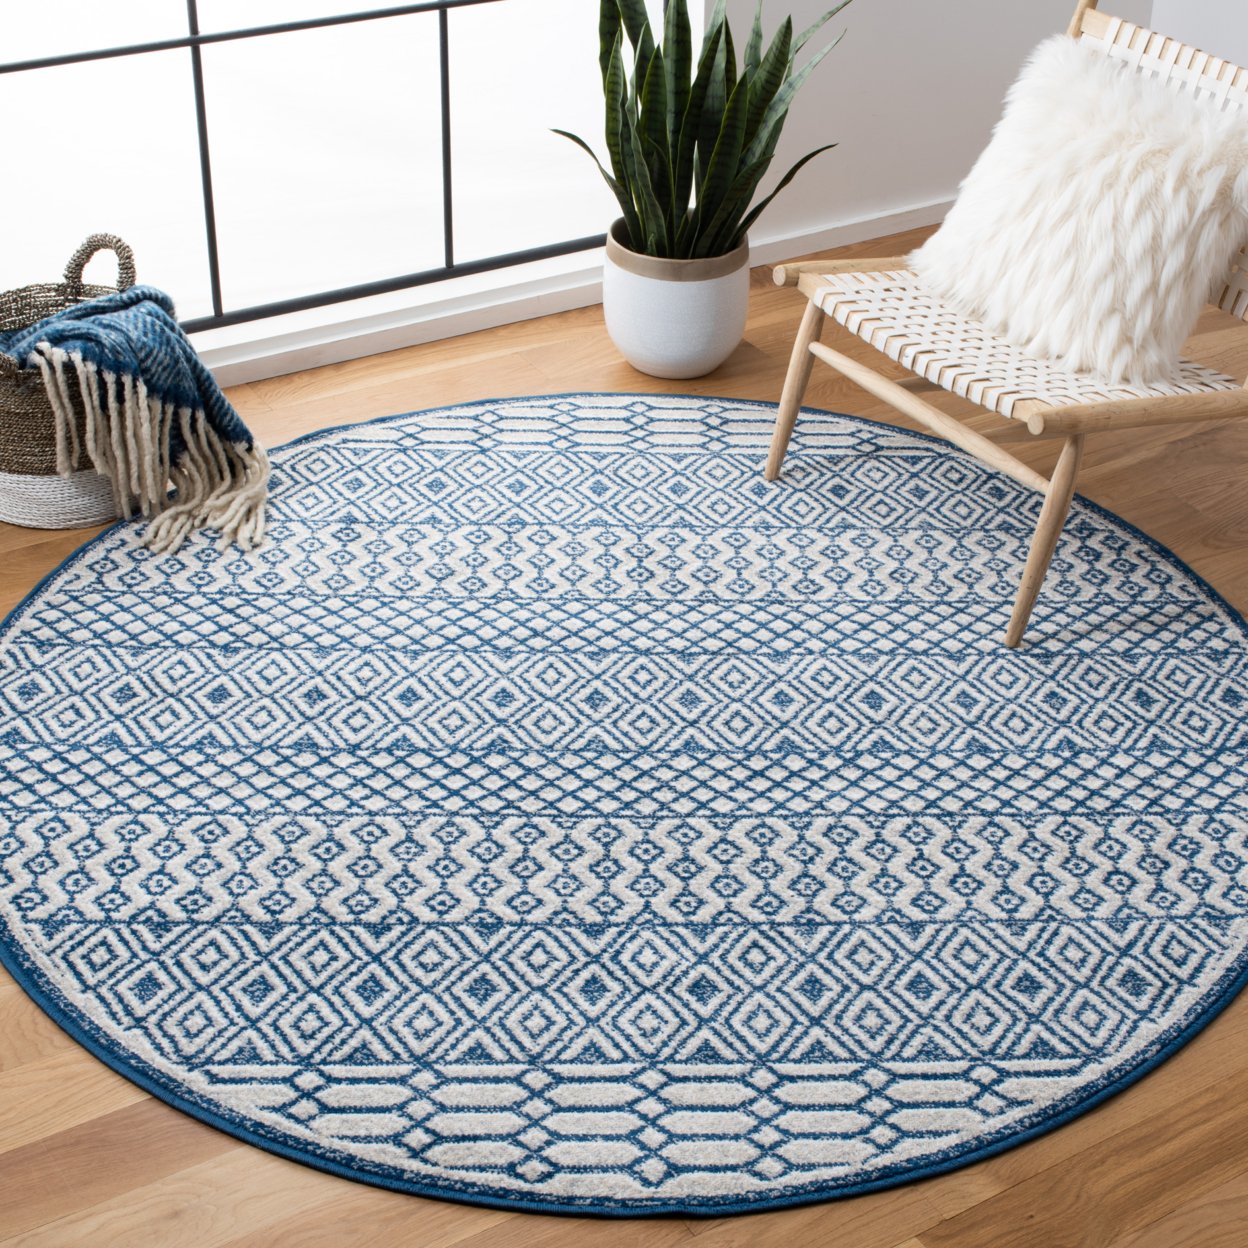 SAFAVIEH Belmont Collection BMT132N Navy / Grey Rug - 6-7 X 6-7 Square